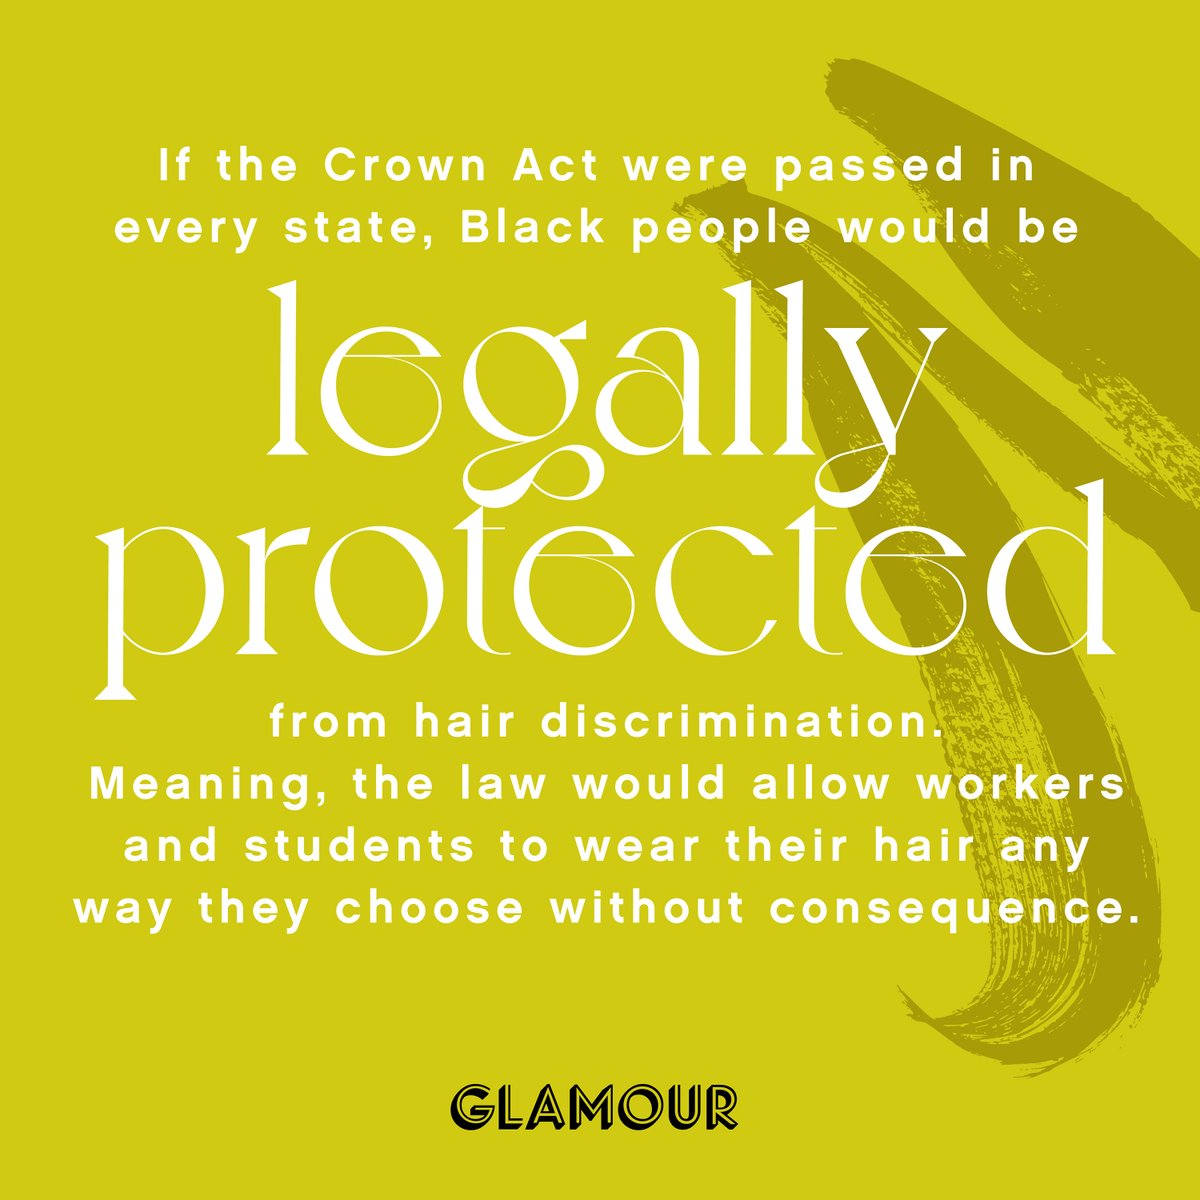 Together, we have the power to end hair discrimination. To demand  #TheCrownAct gets passed in your state, sign the petition.   http://glmr.co/QmqZoZK   #OurHairIssue